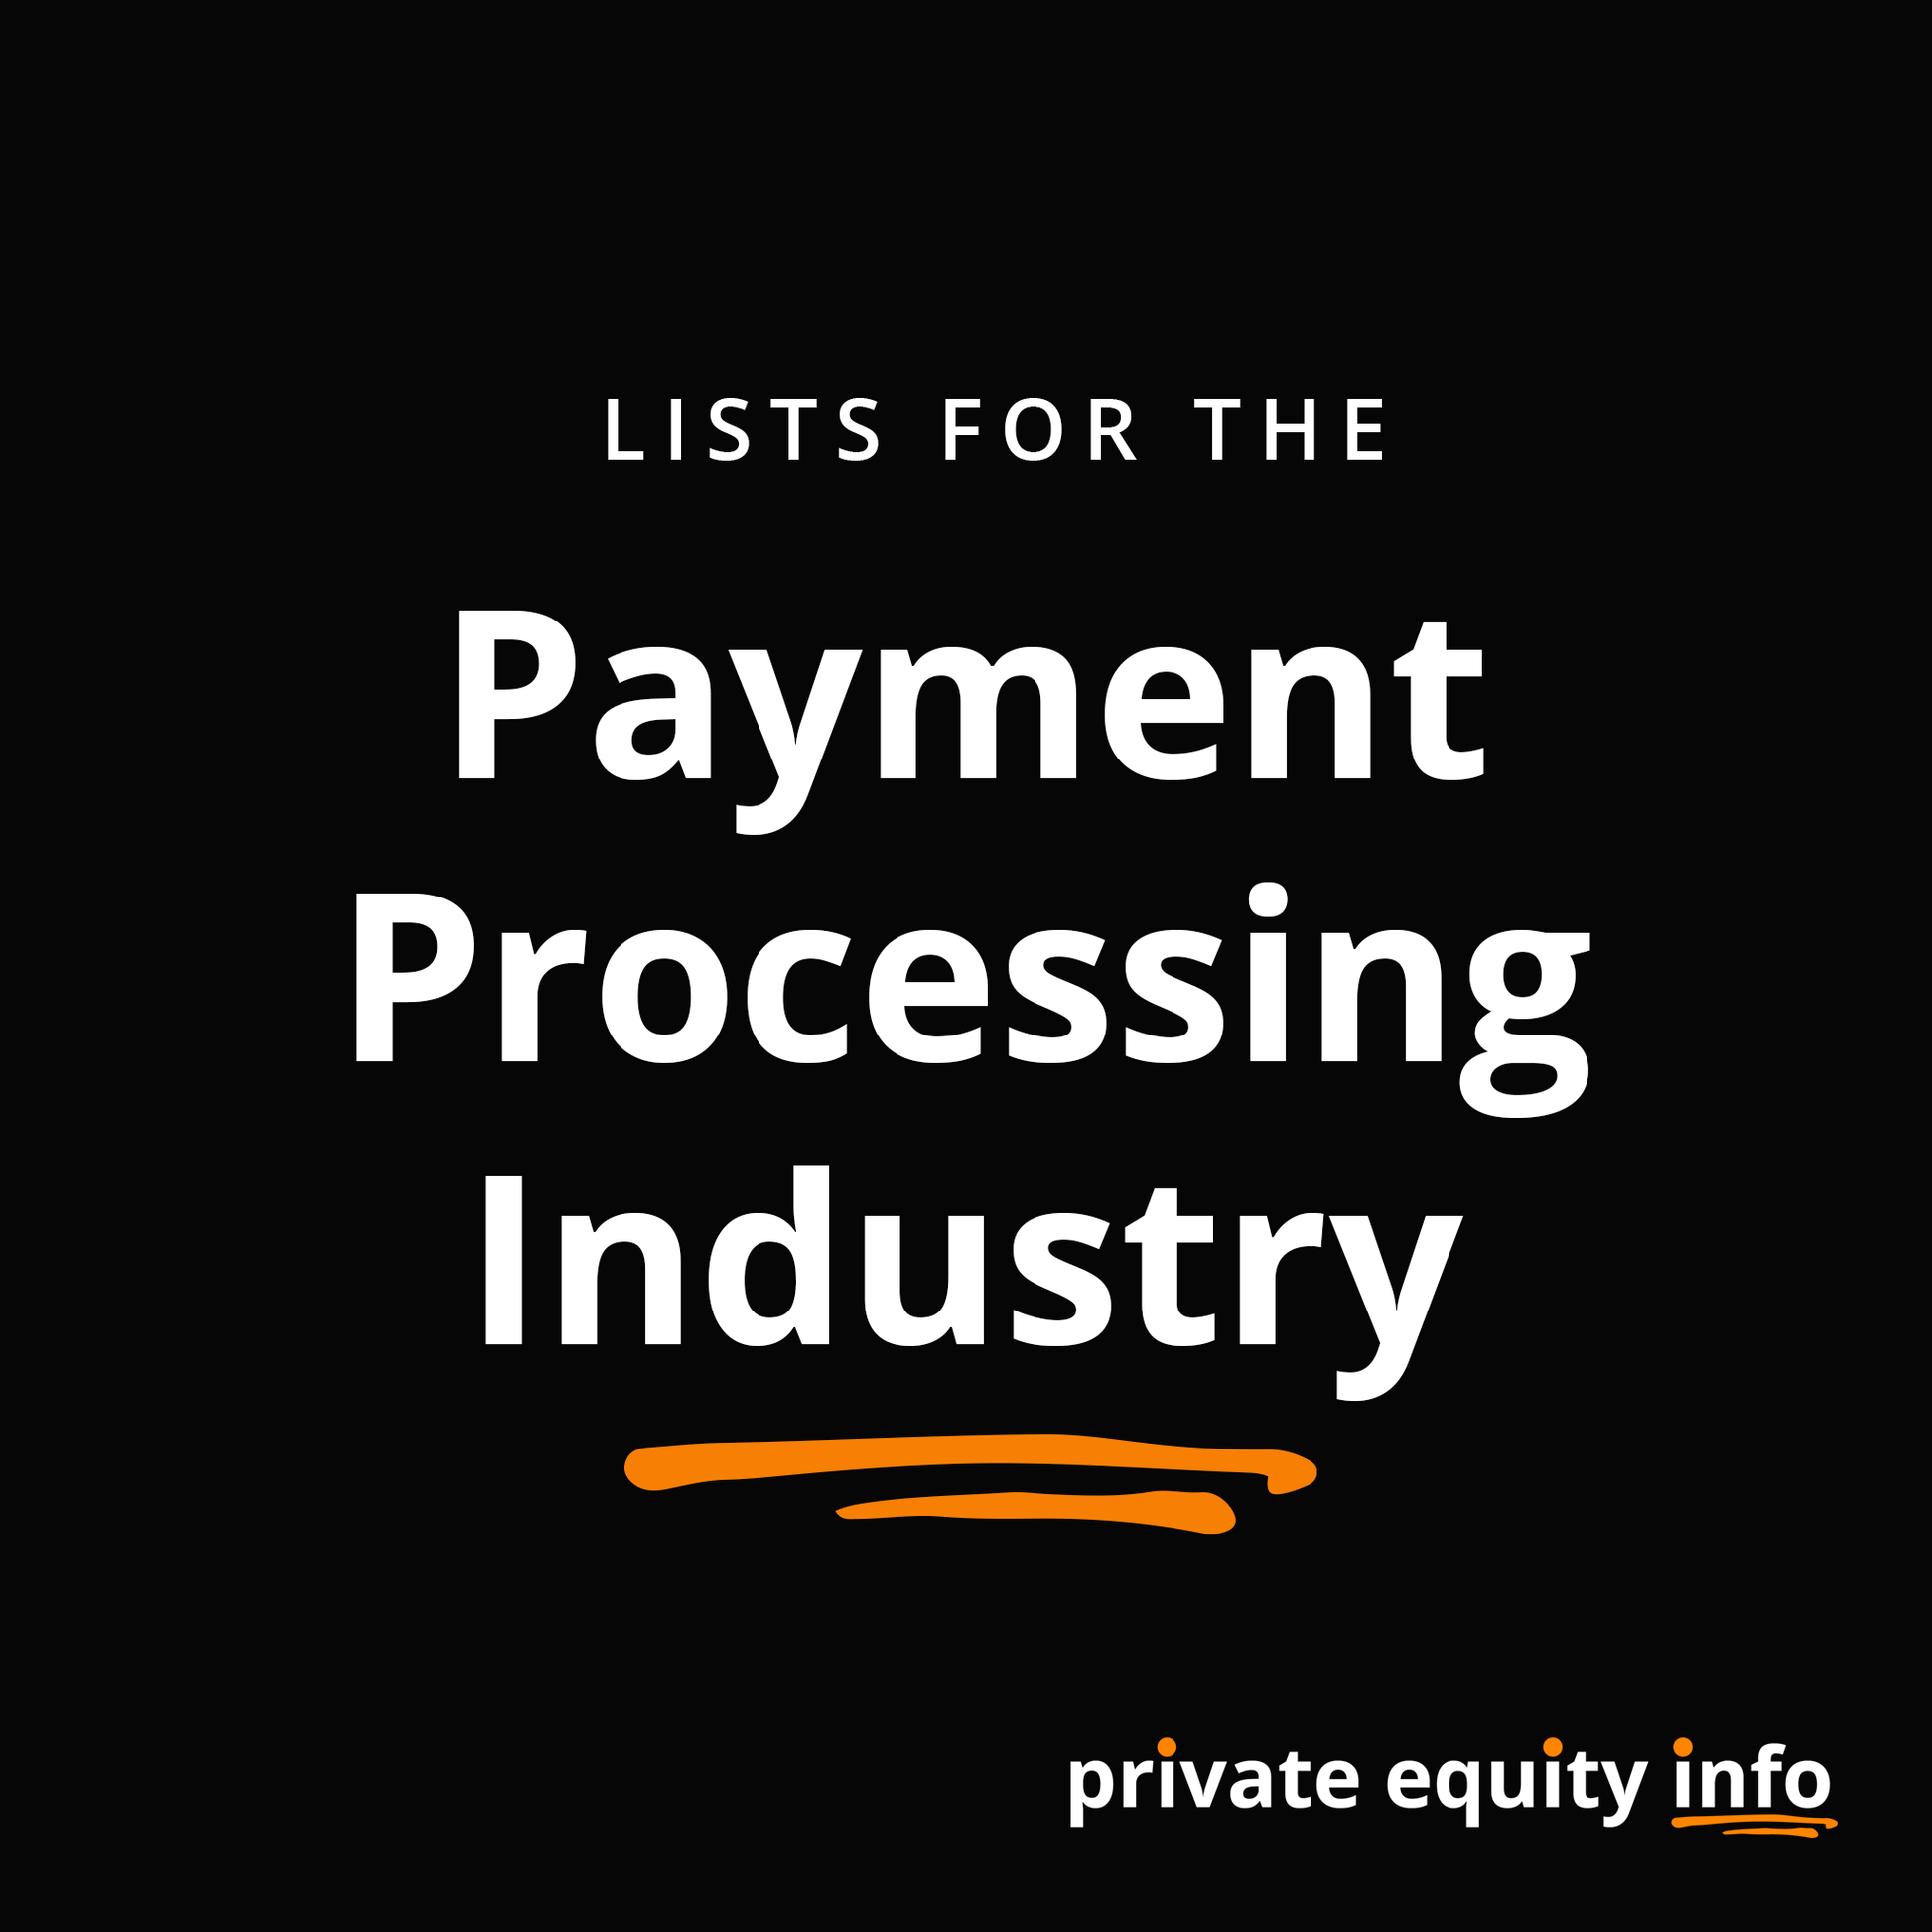 List of Private Equity Firms in Payment Processing Financial Services